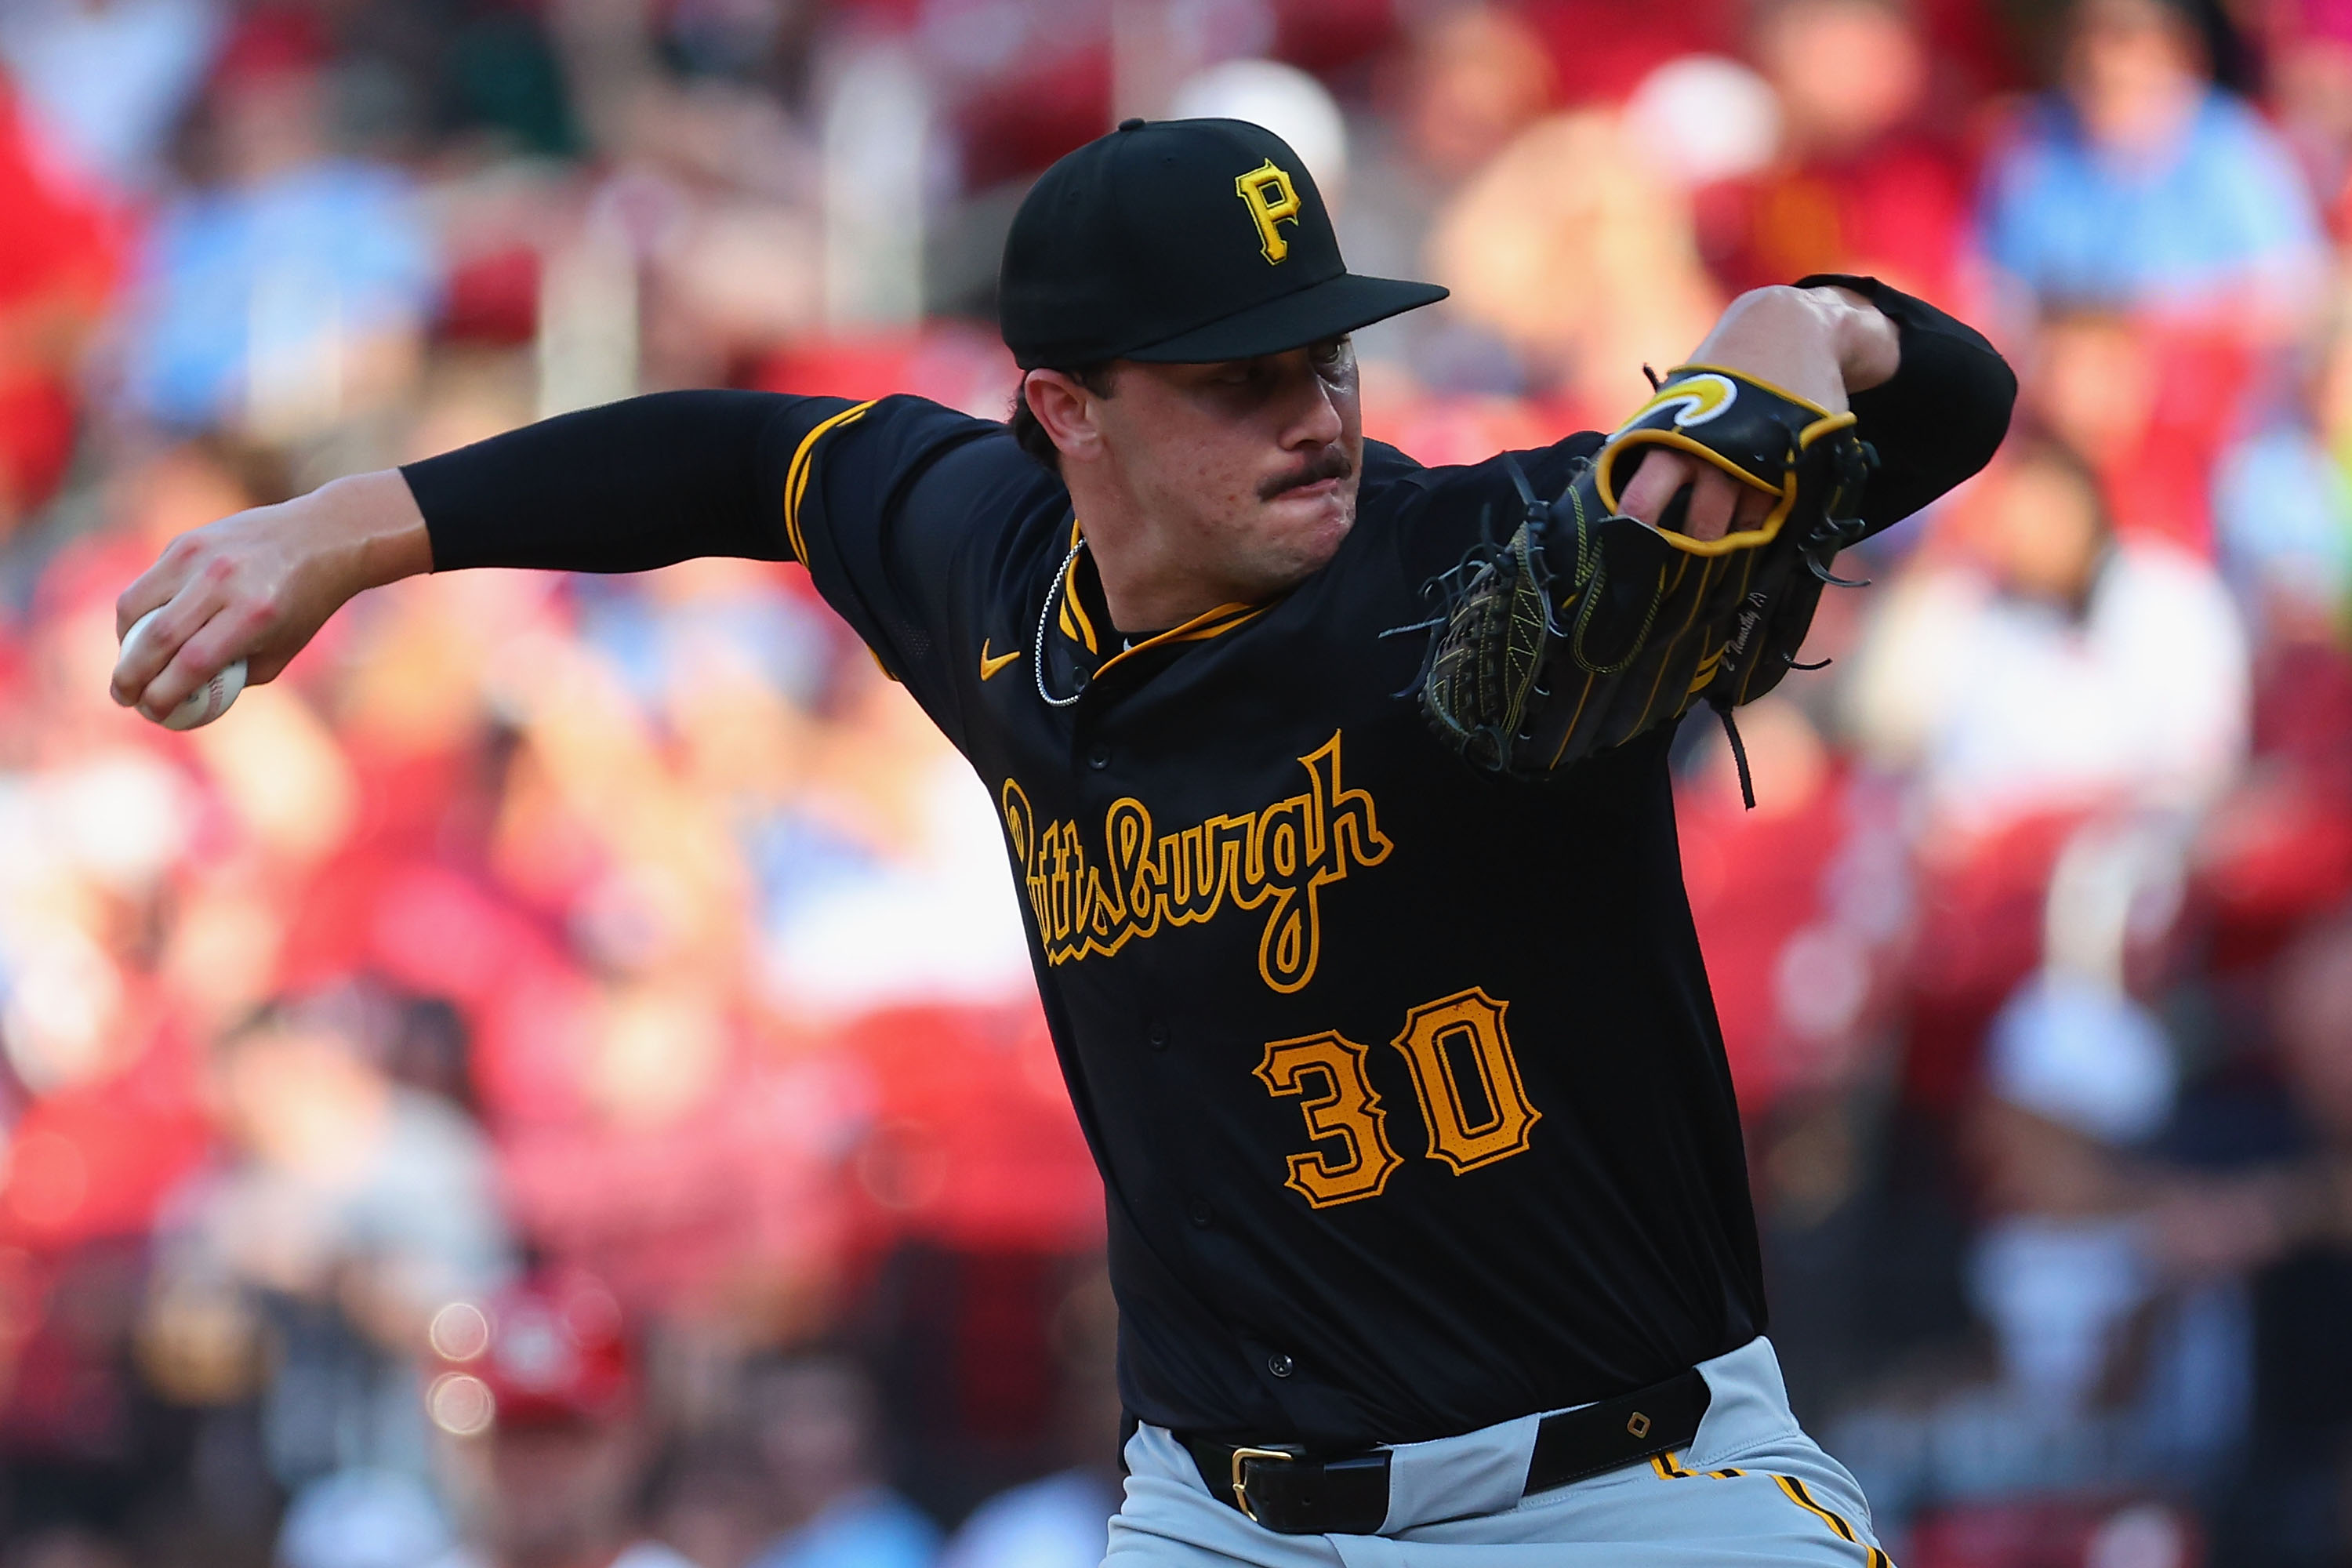 Skenes has been a revelation for the Pirates during his rookie season